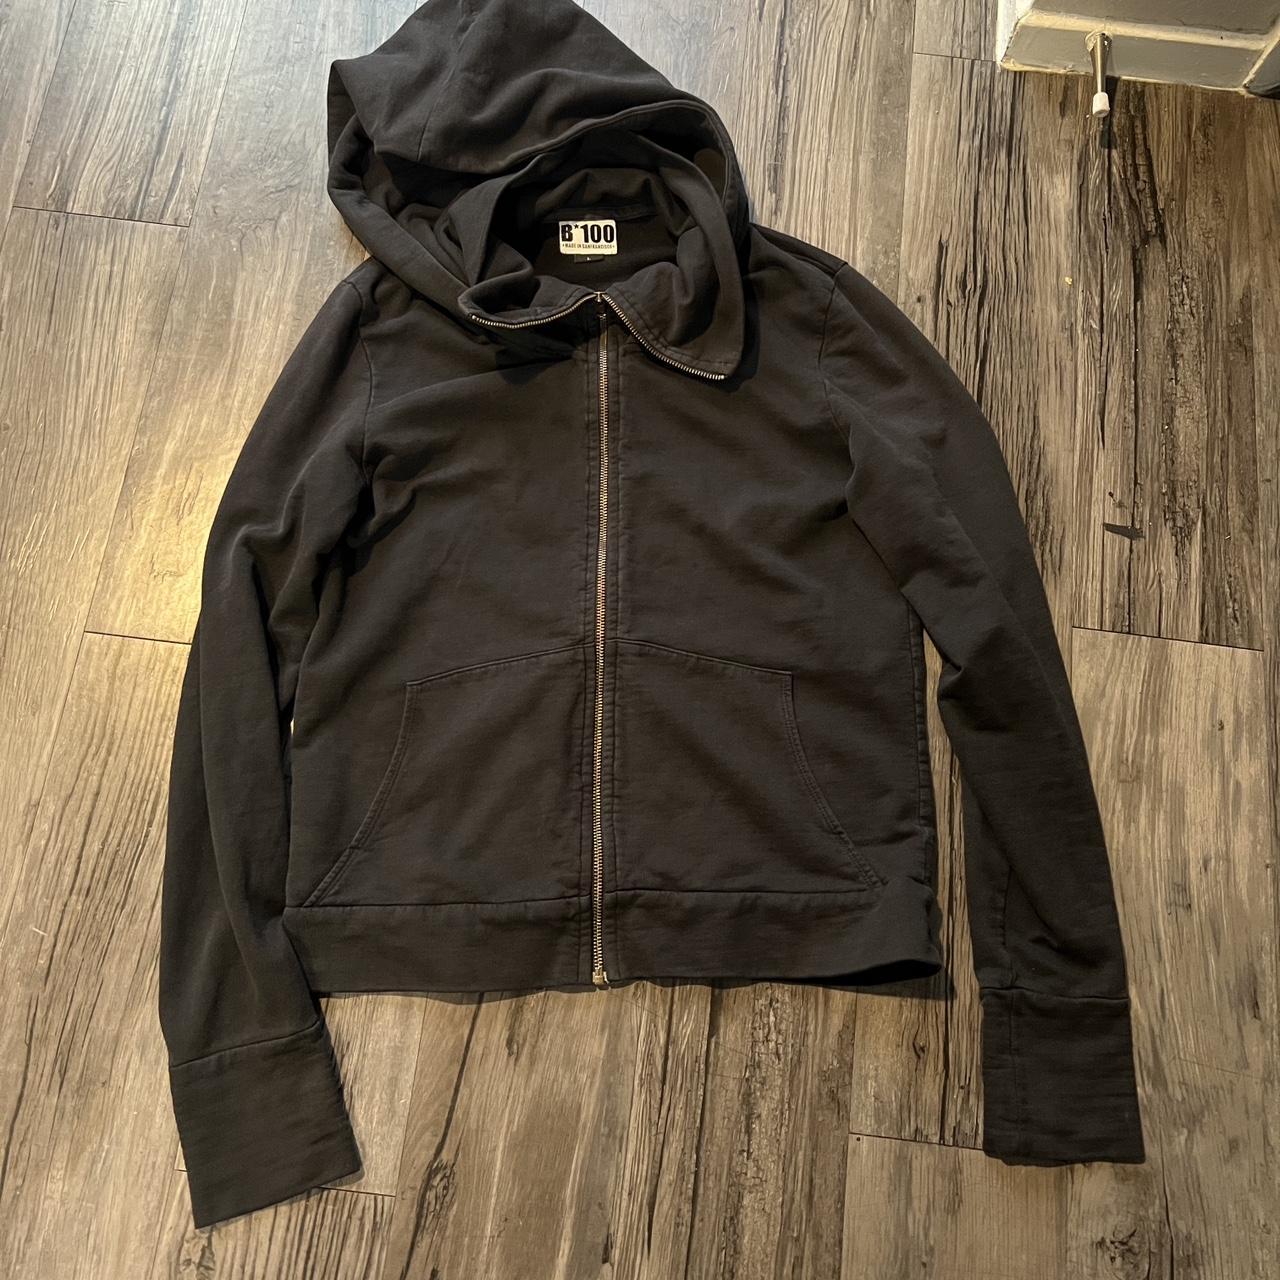 B*100 hoodie/half zip up Size large but can fit a... - Depop